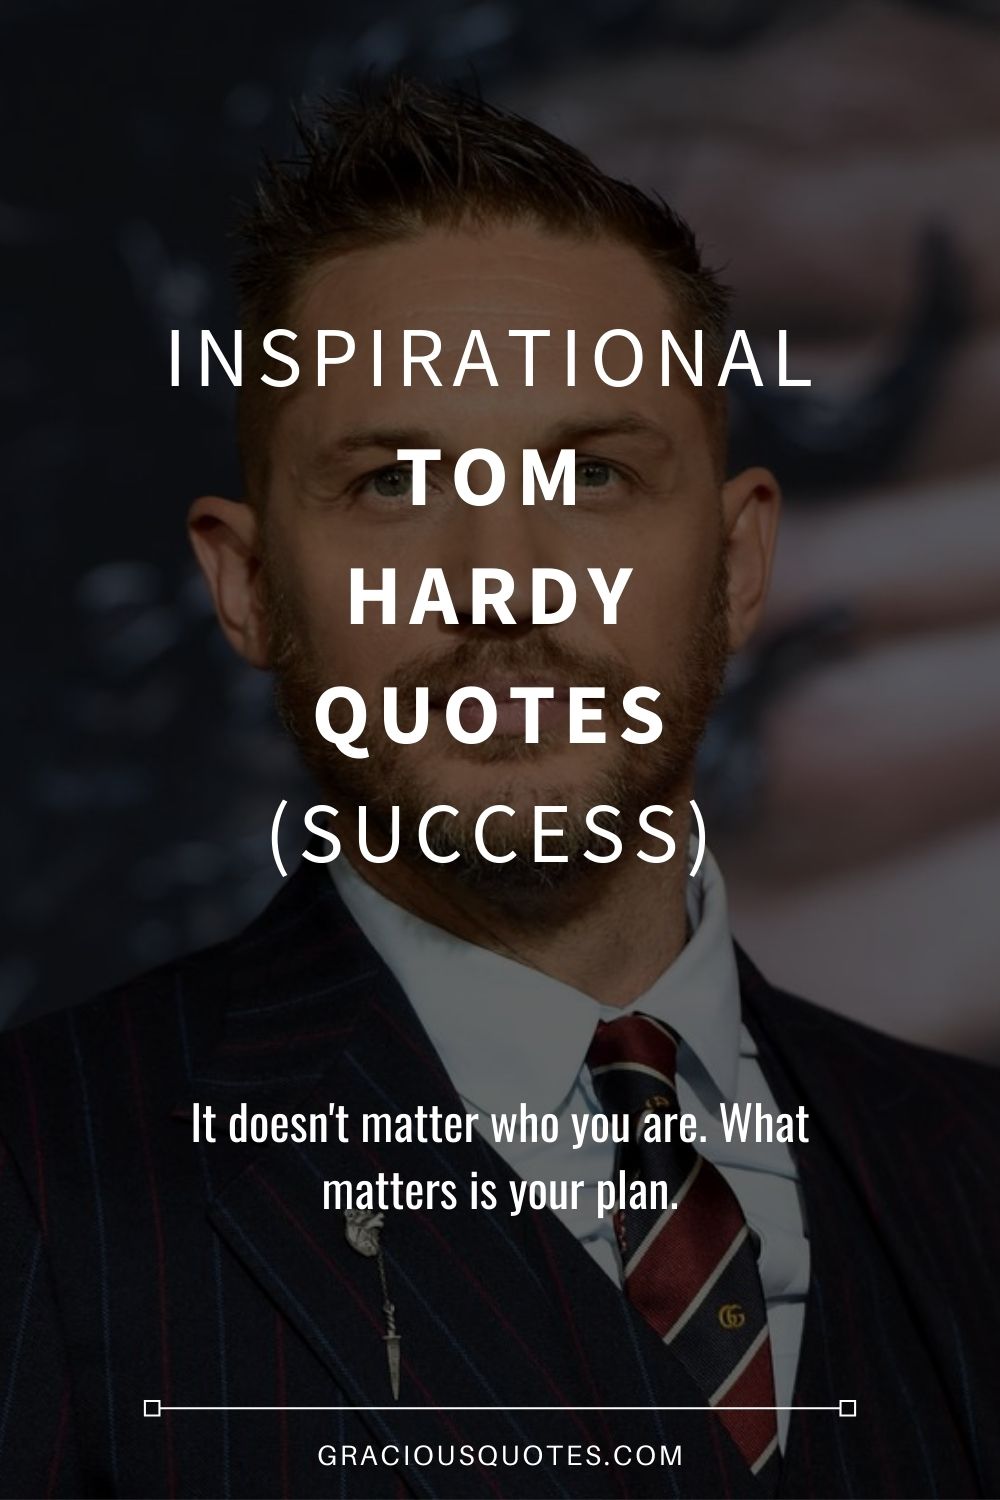 Inspirational Tom Hardy Quotes (SUCCESS) - Gracious Quotes